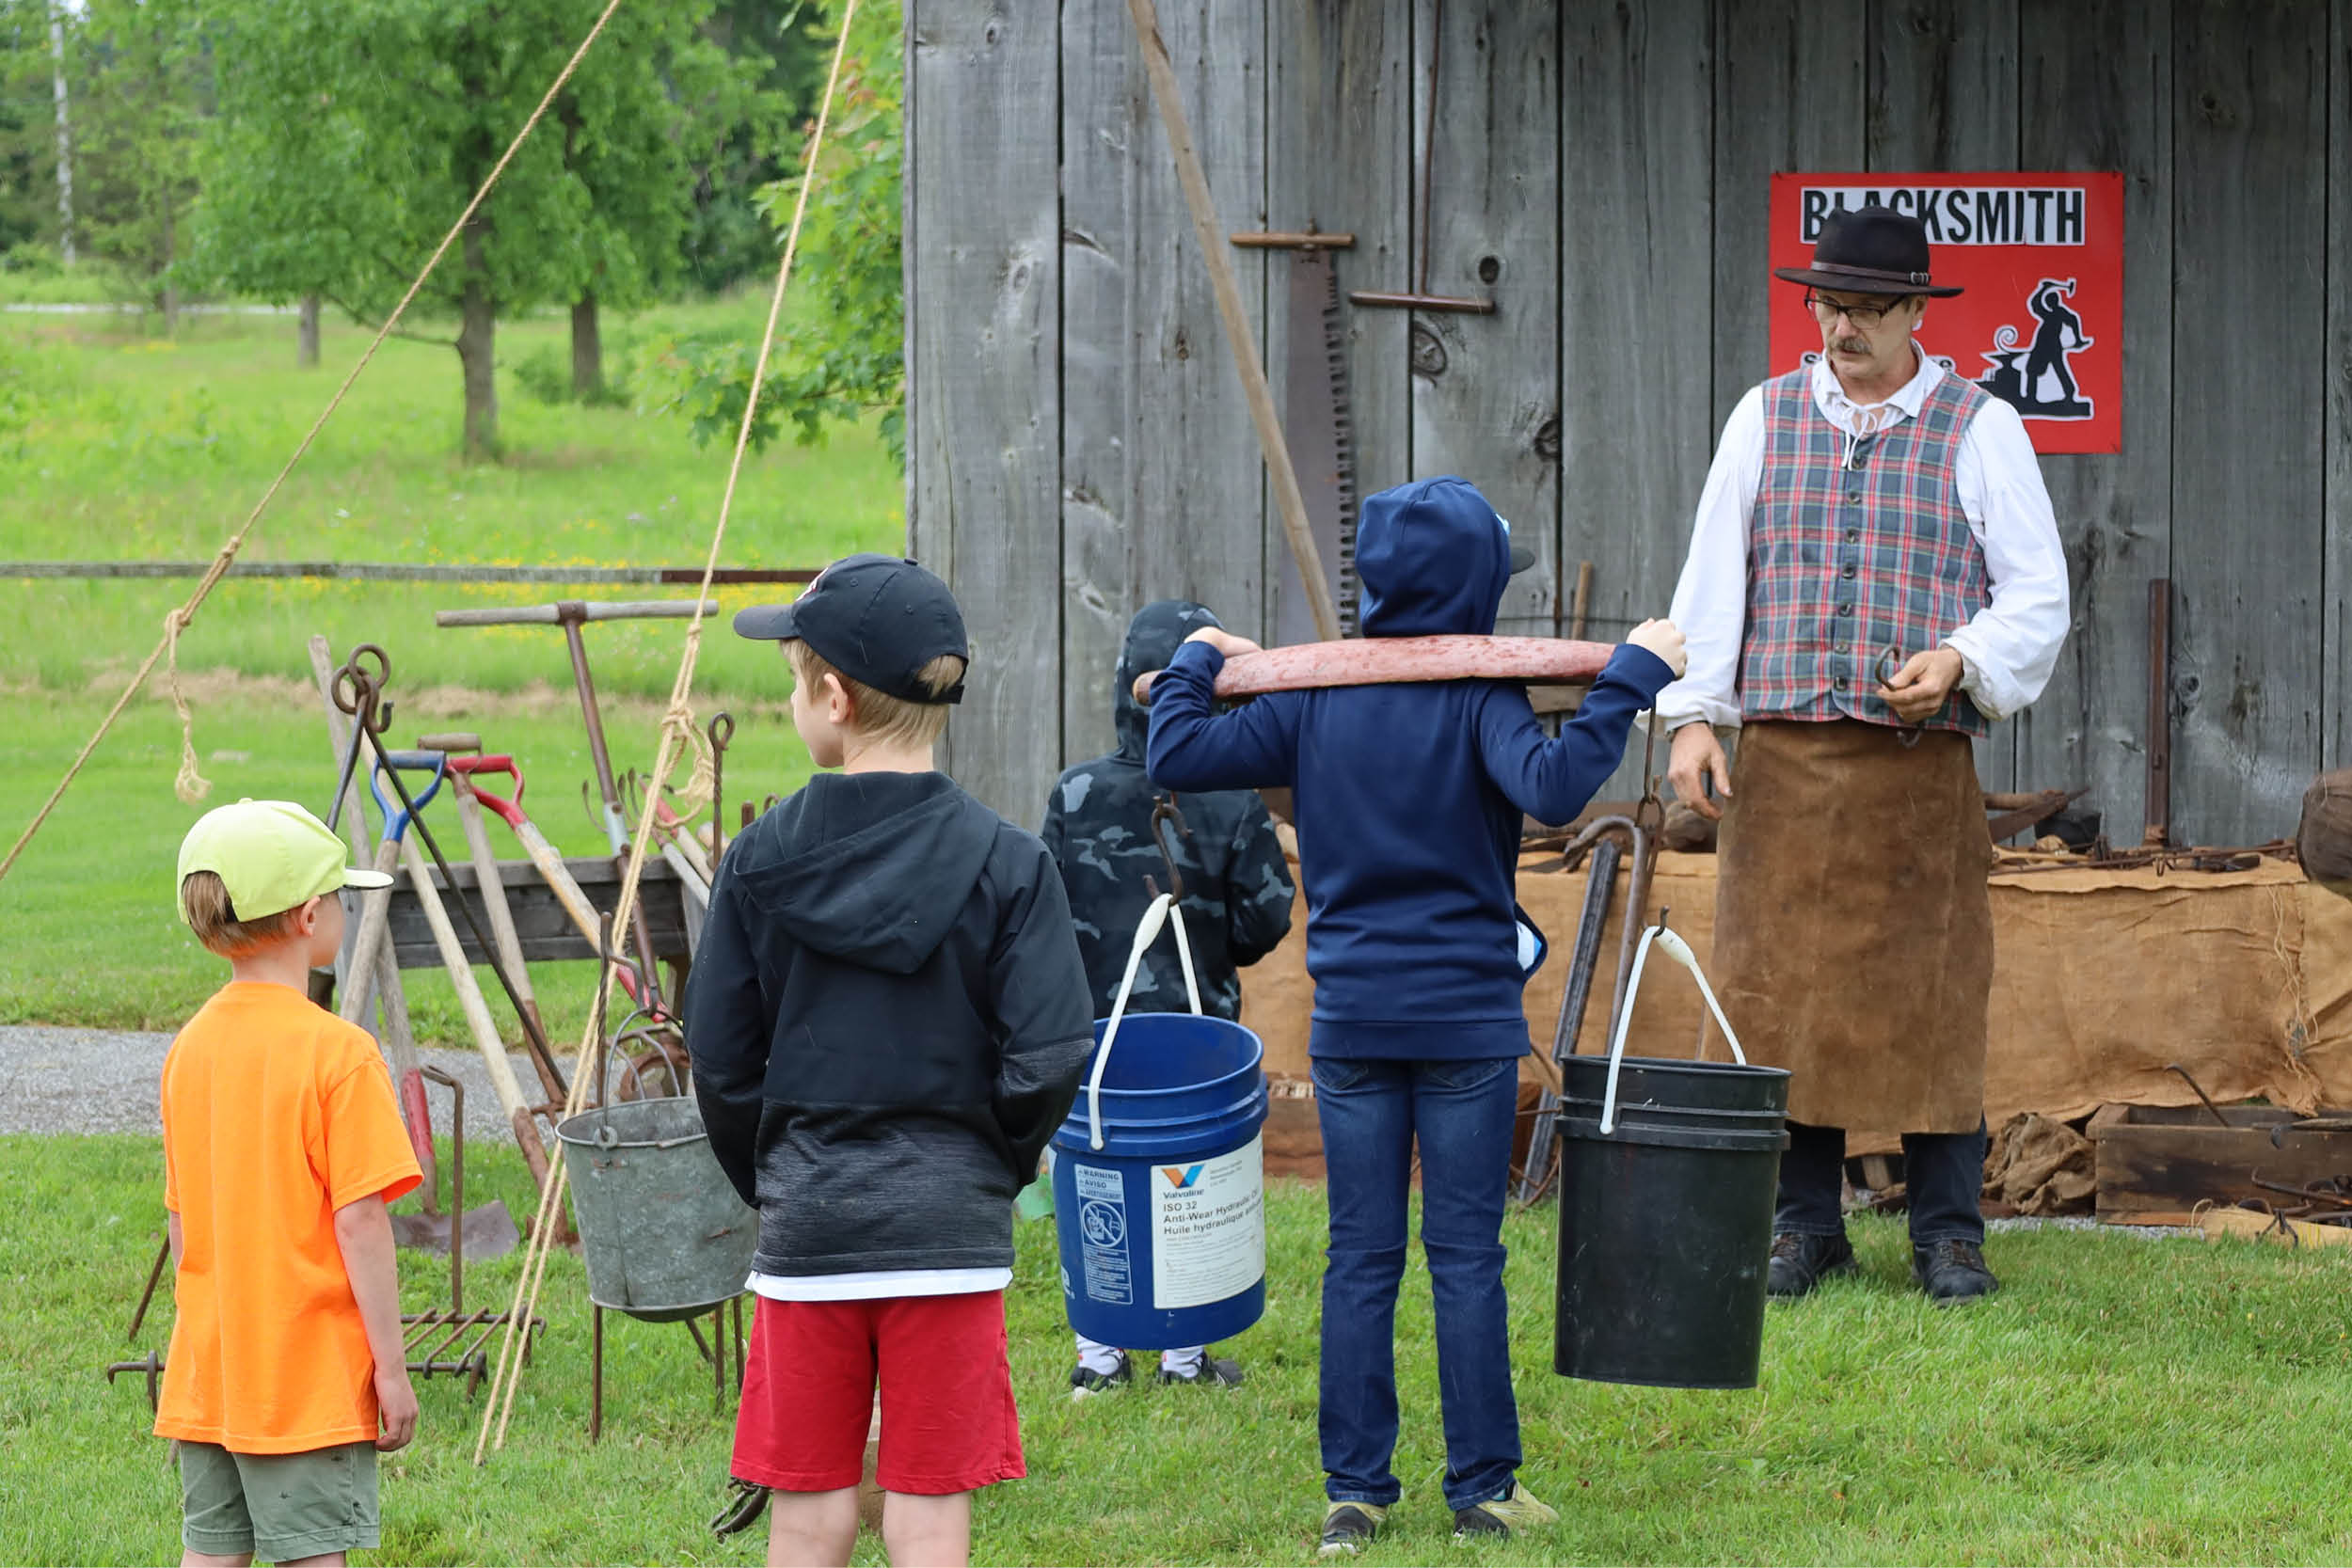 Children wait while a child tries a yoke with buckets during a historical blacksmith demonstration at Black Gold Fest.